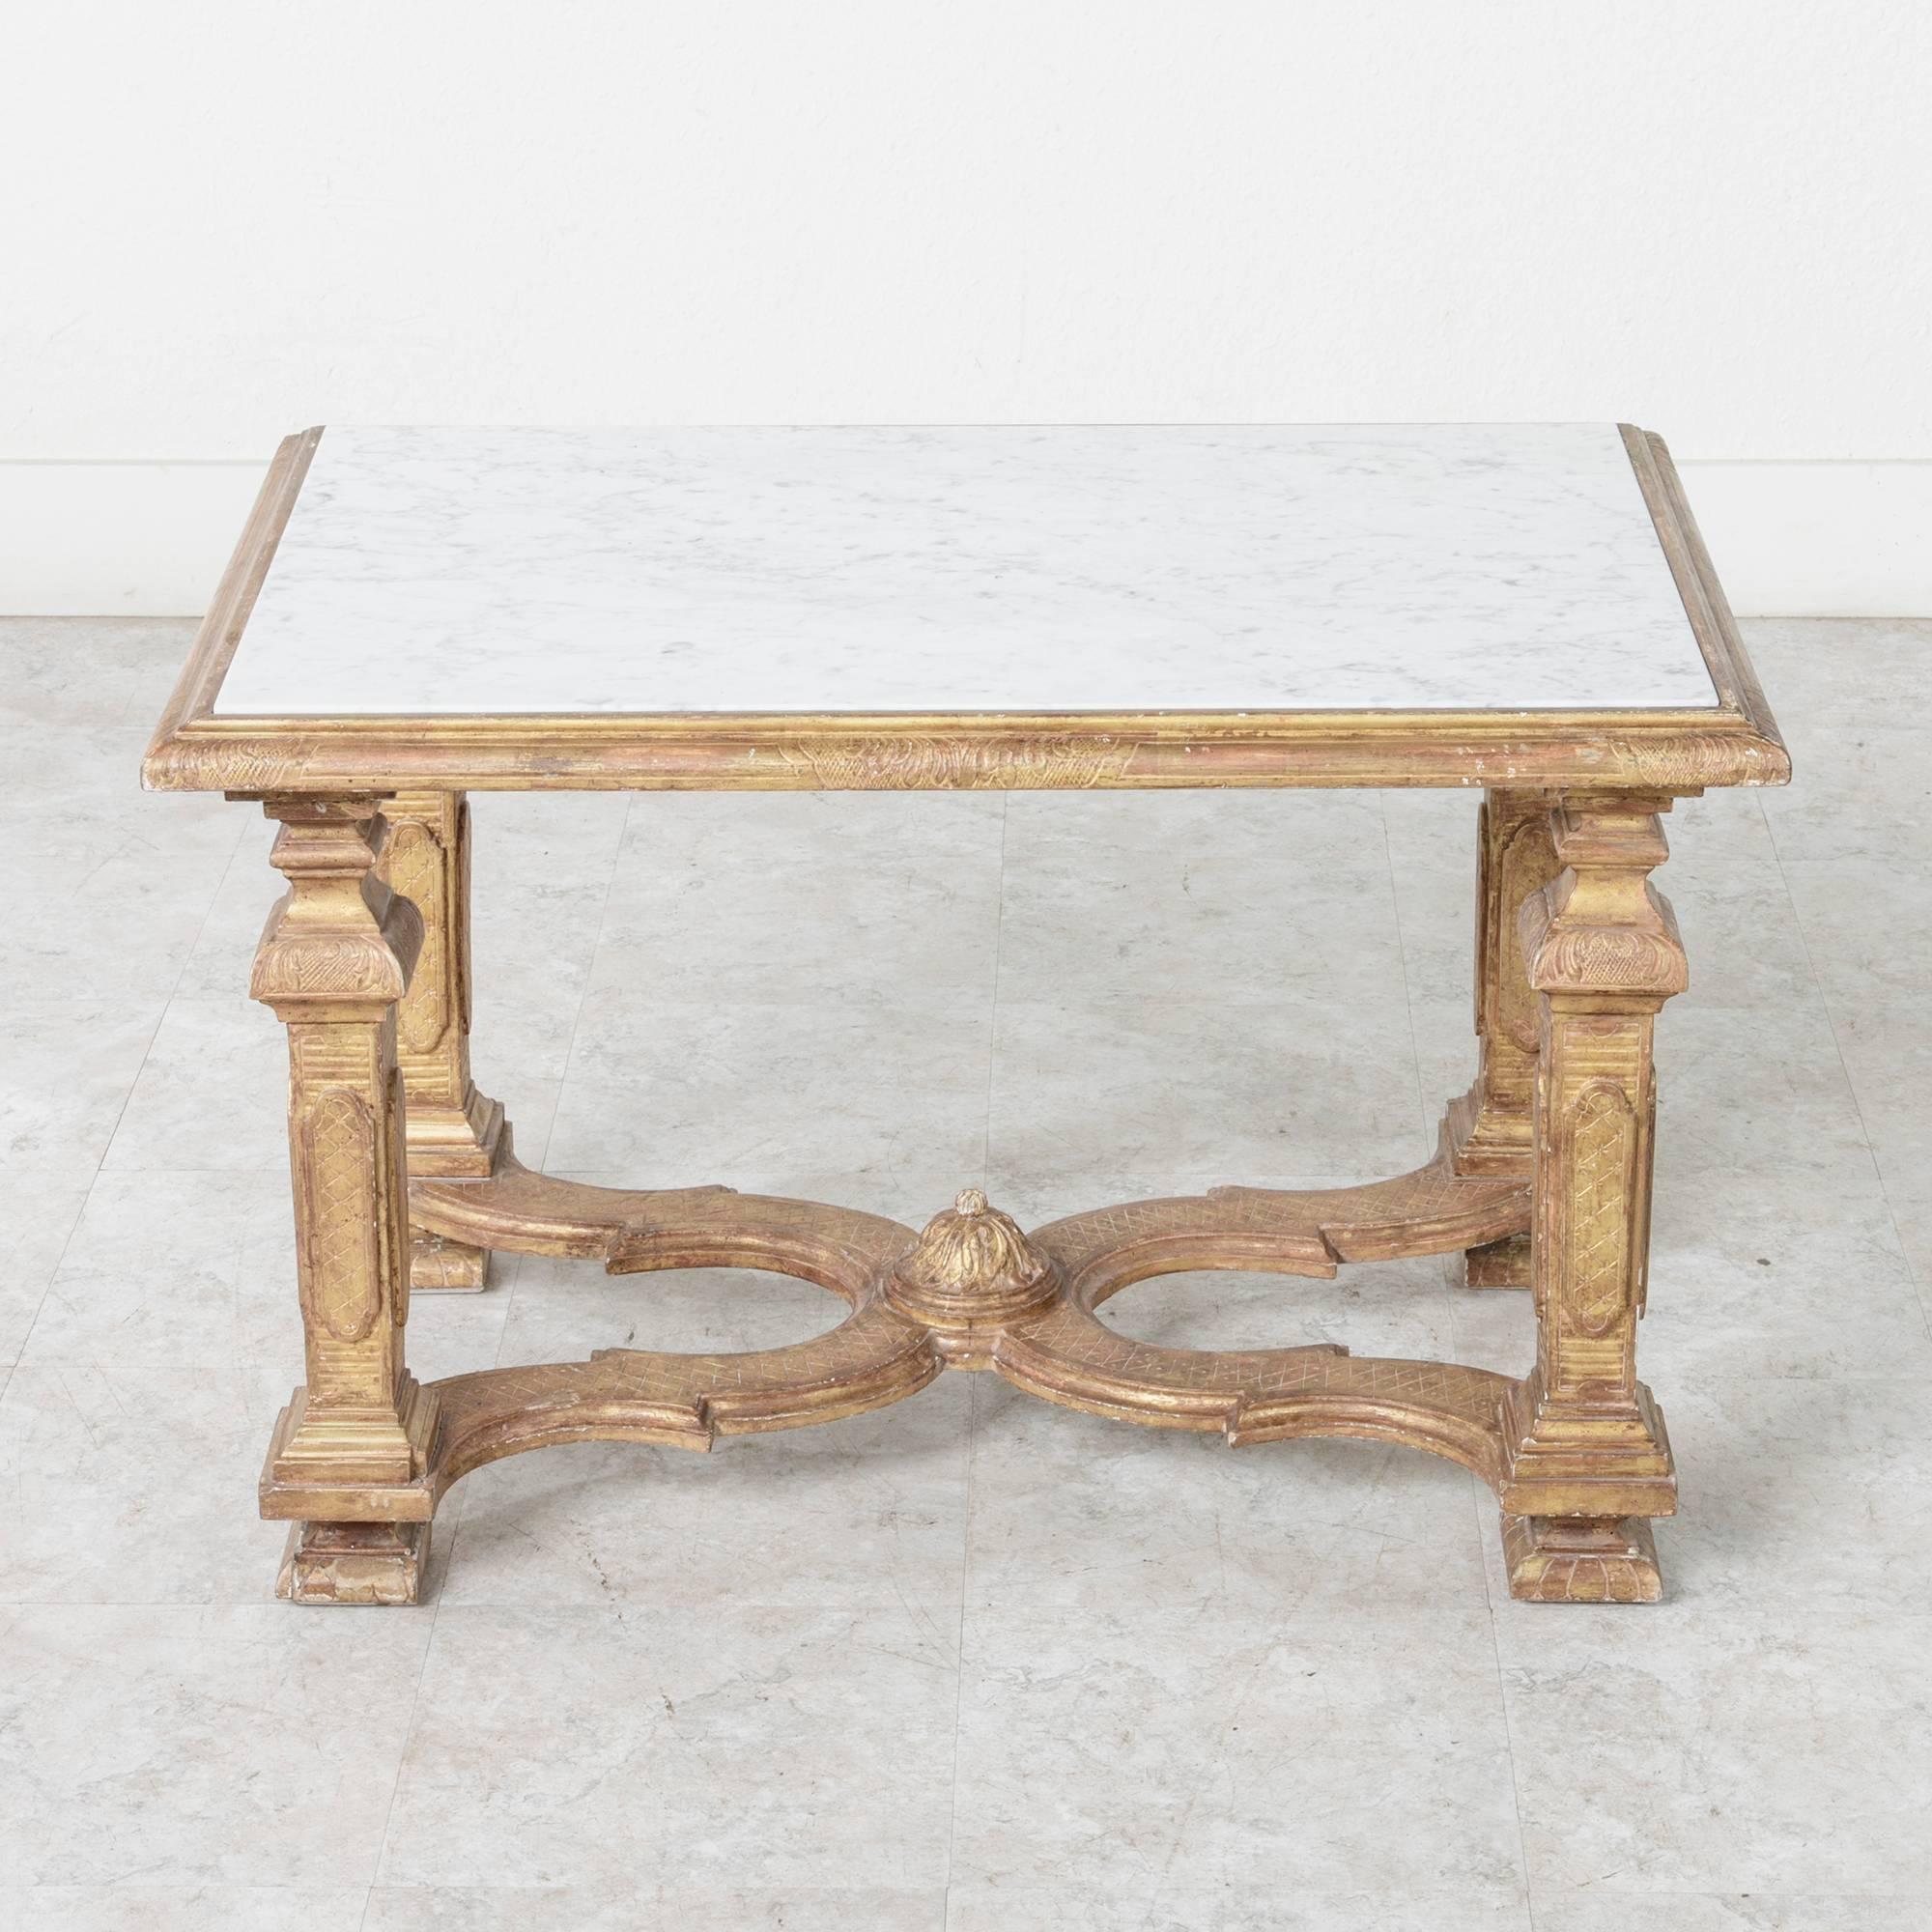 This Mid-Century giltwood Italian cocktail or coffee table is presented in the Louis XIV style. It features square baluster legs with incised carvings and an X-stretcher culminating in a dome shaped finial draped with acanthus leaves. An inset of